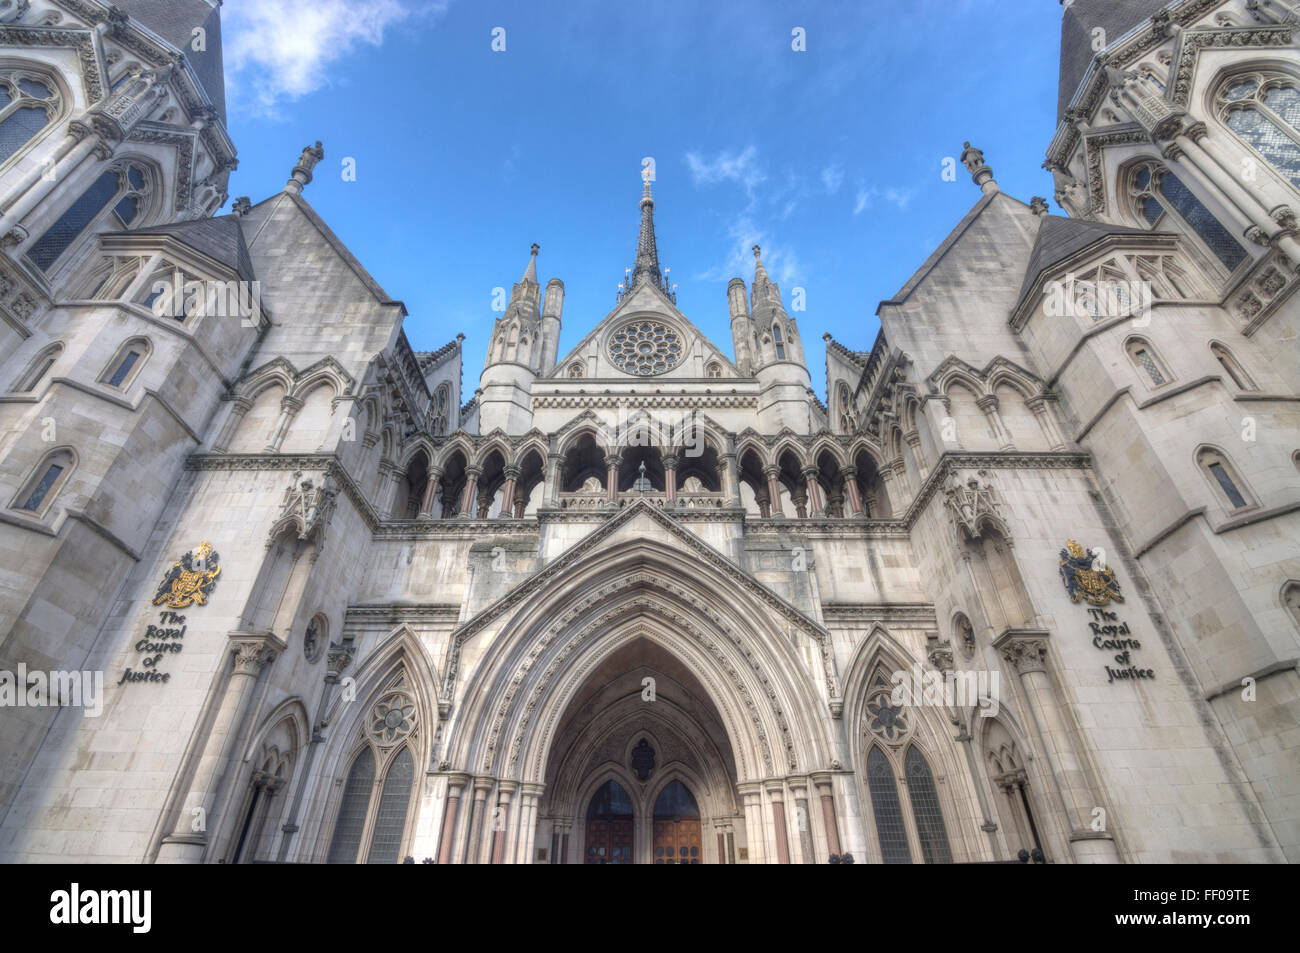 Royal Courts of Justice High Court London Banque D'Images